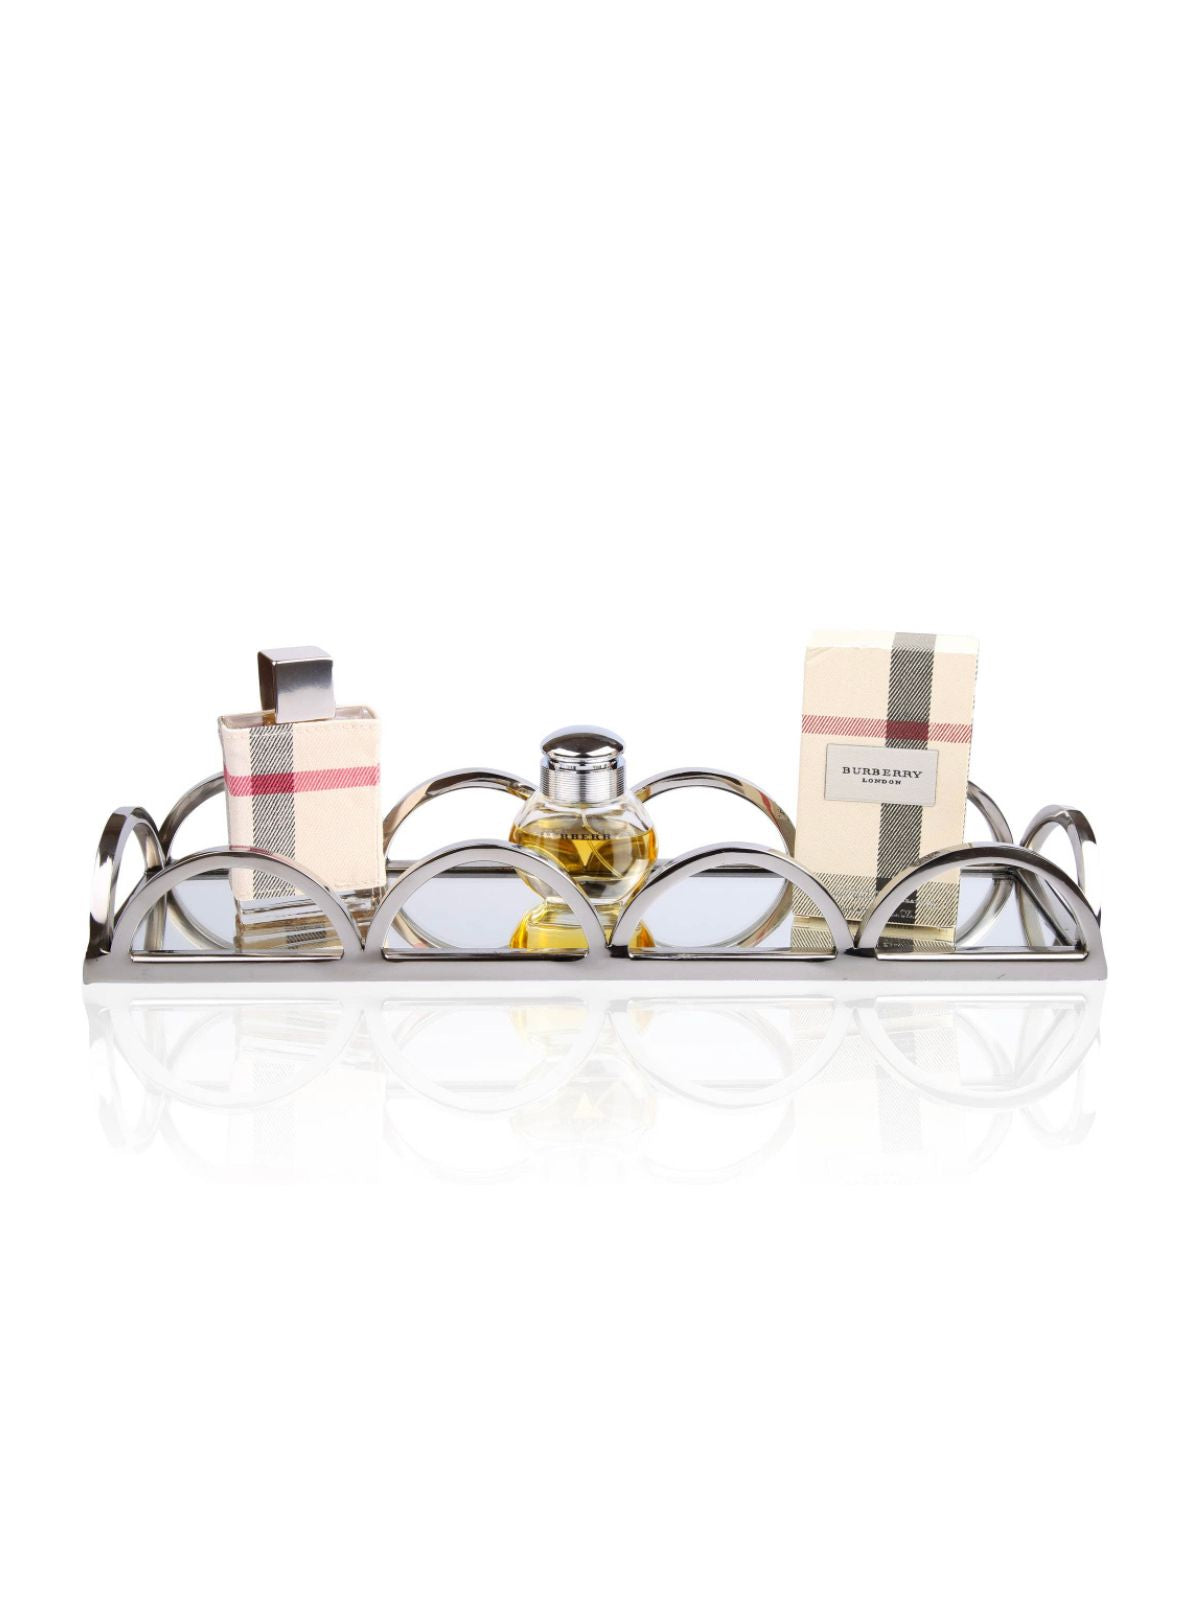 Rectangular Mirrored Decorative Vanity Tray with Chrome Loop Edges Sold by KYA Home Decor.